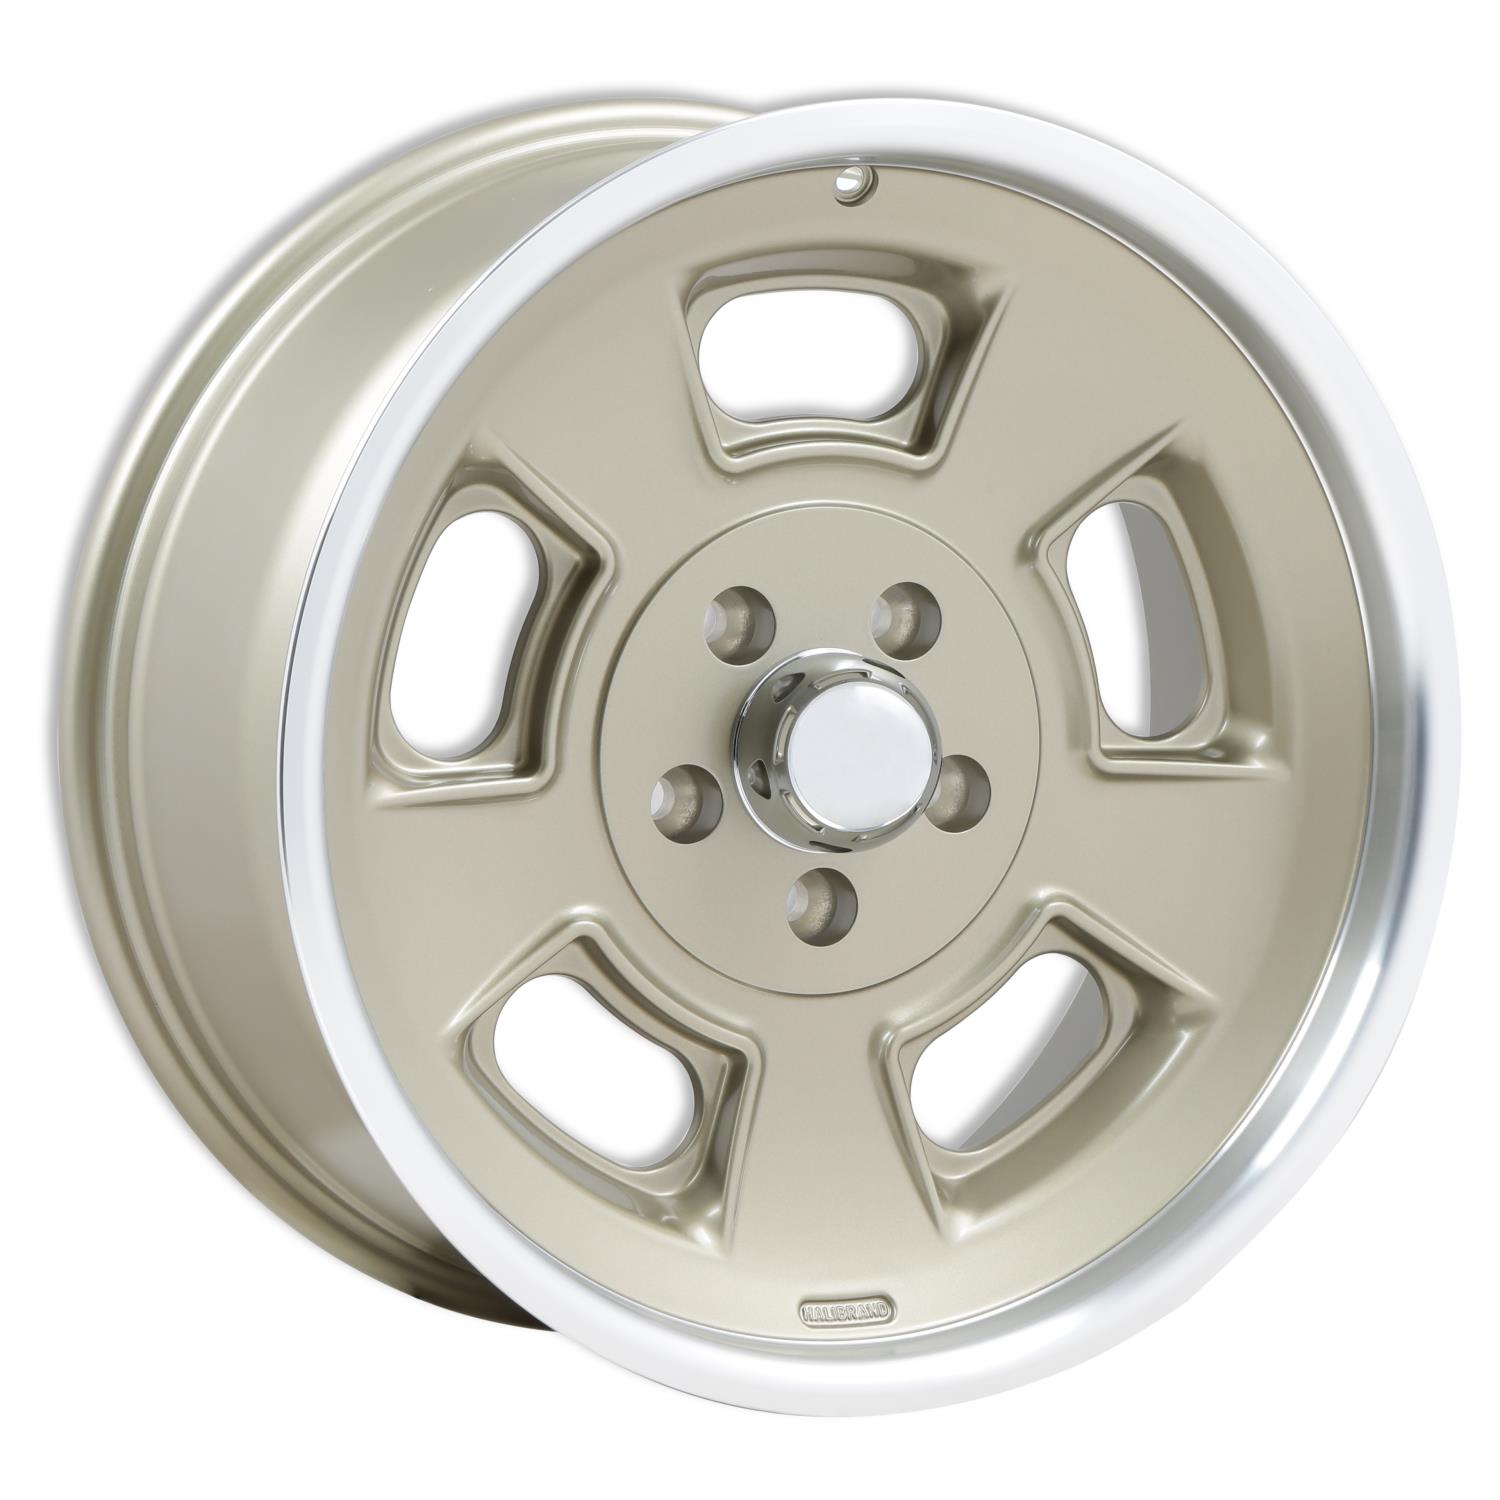 Sprint Front Wheel, Size: 19x8.5", Bolt Pattern: 5x5", Backspace: 5.25" [MAG7 with Machined Lip - Semi Gloss Clearcoat]